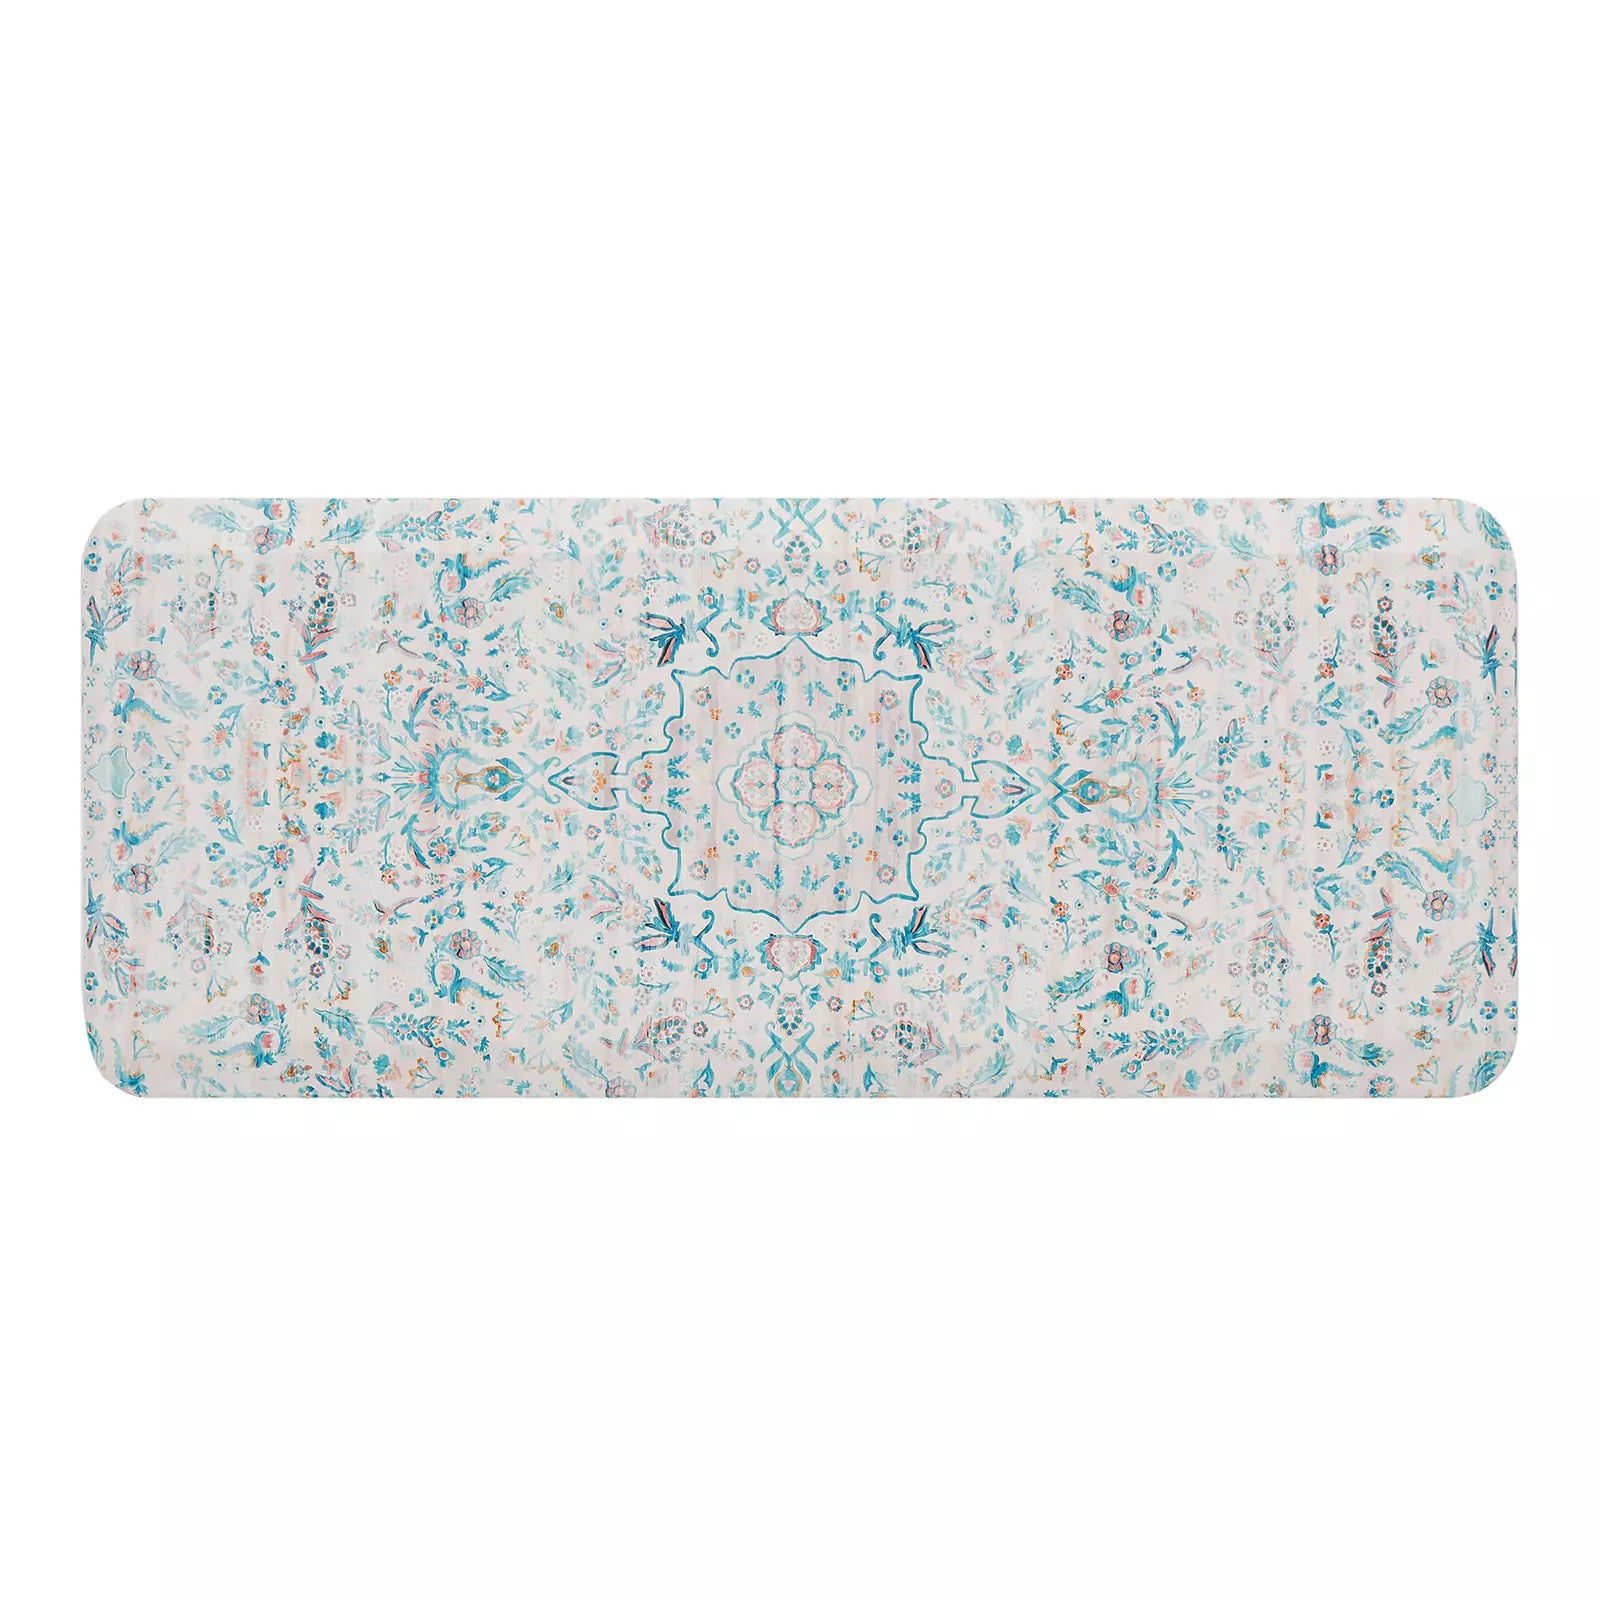 Emile Pale Aqua Muted Blue Pink Floral Boho Standing Mat shown in size 20x48